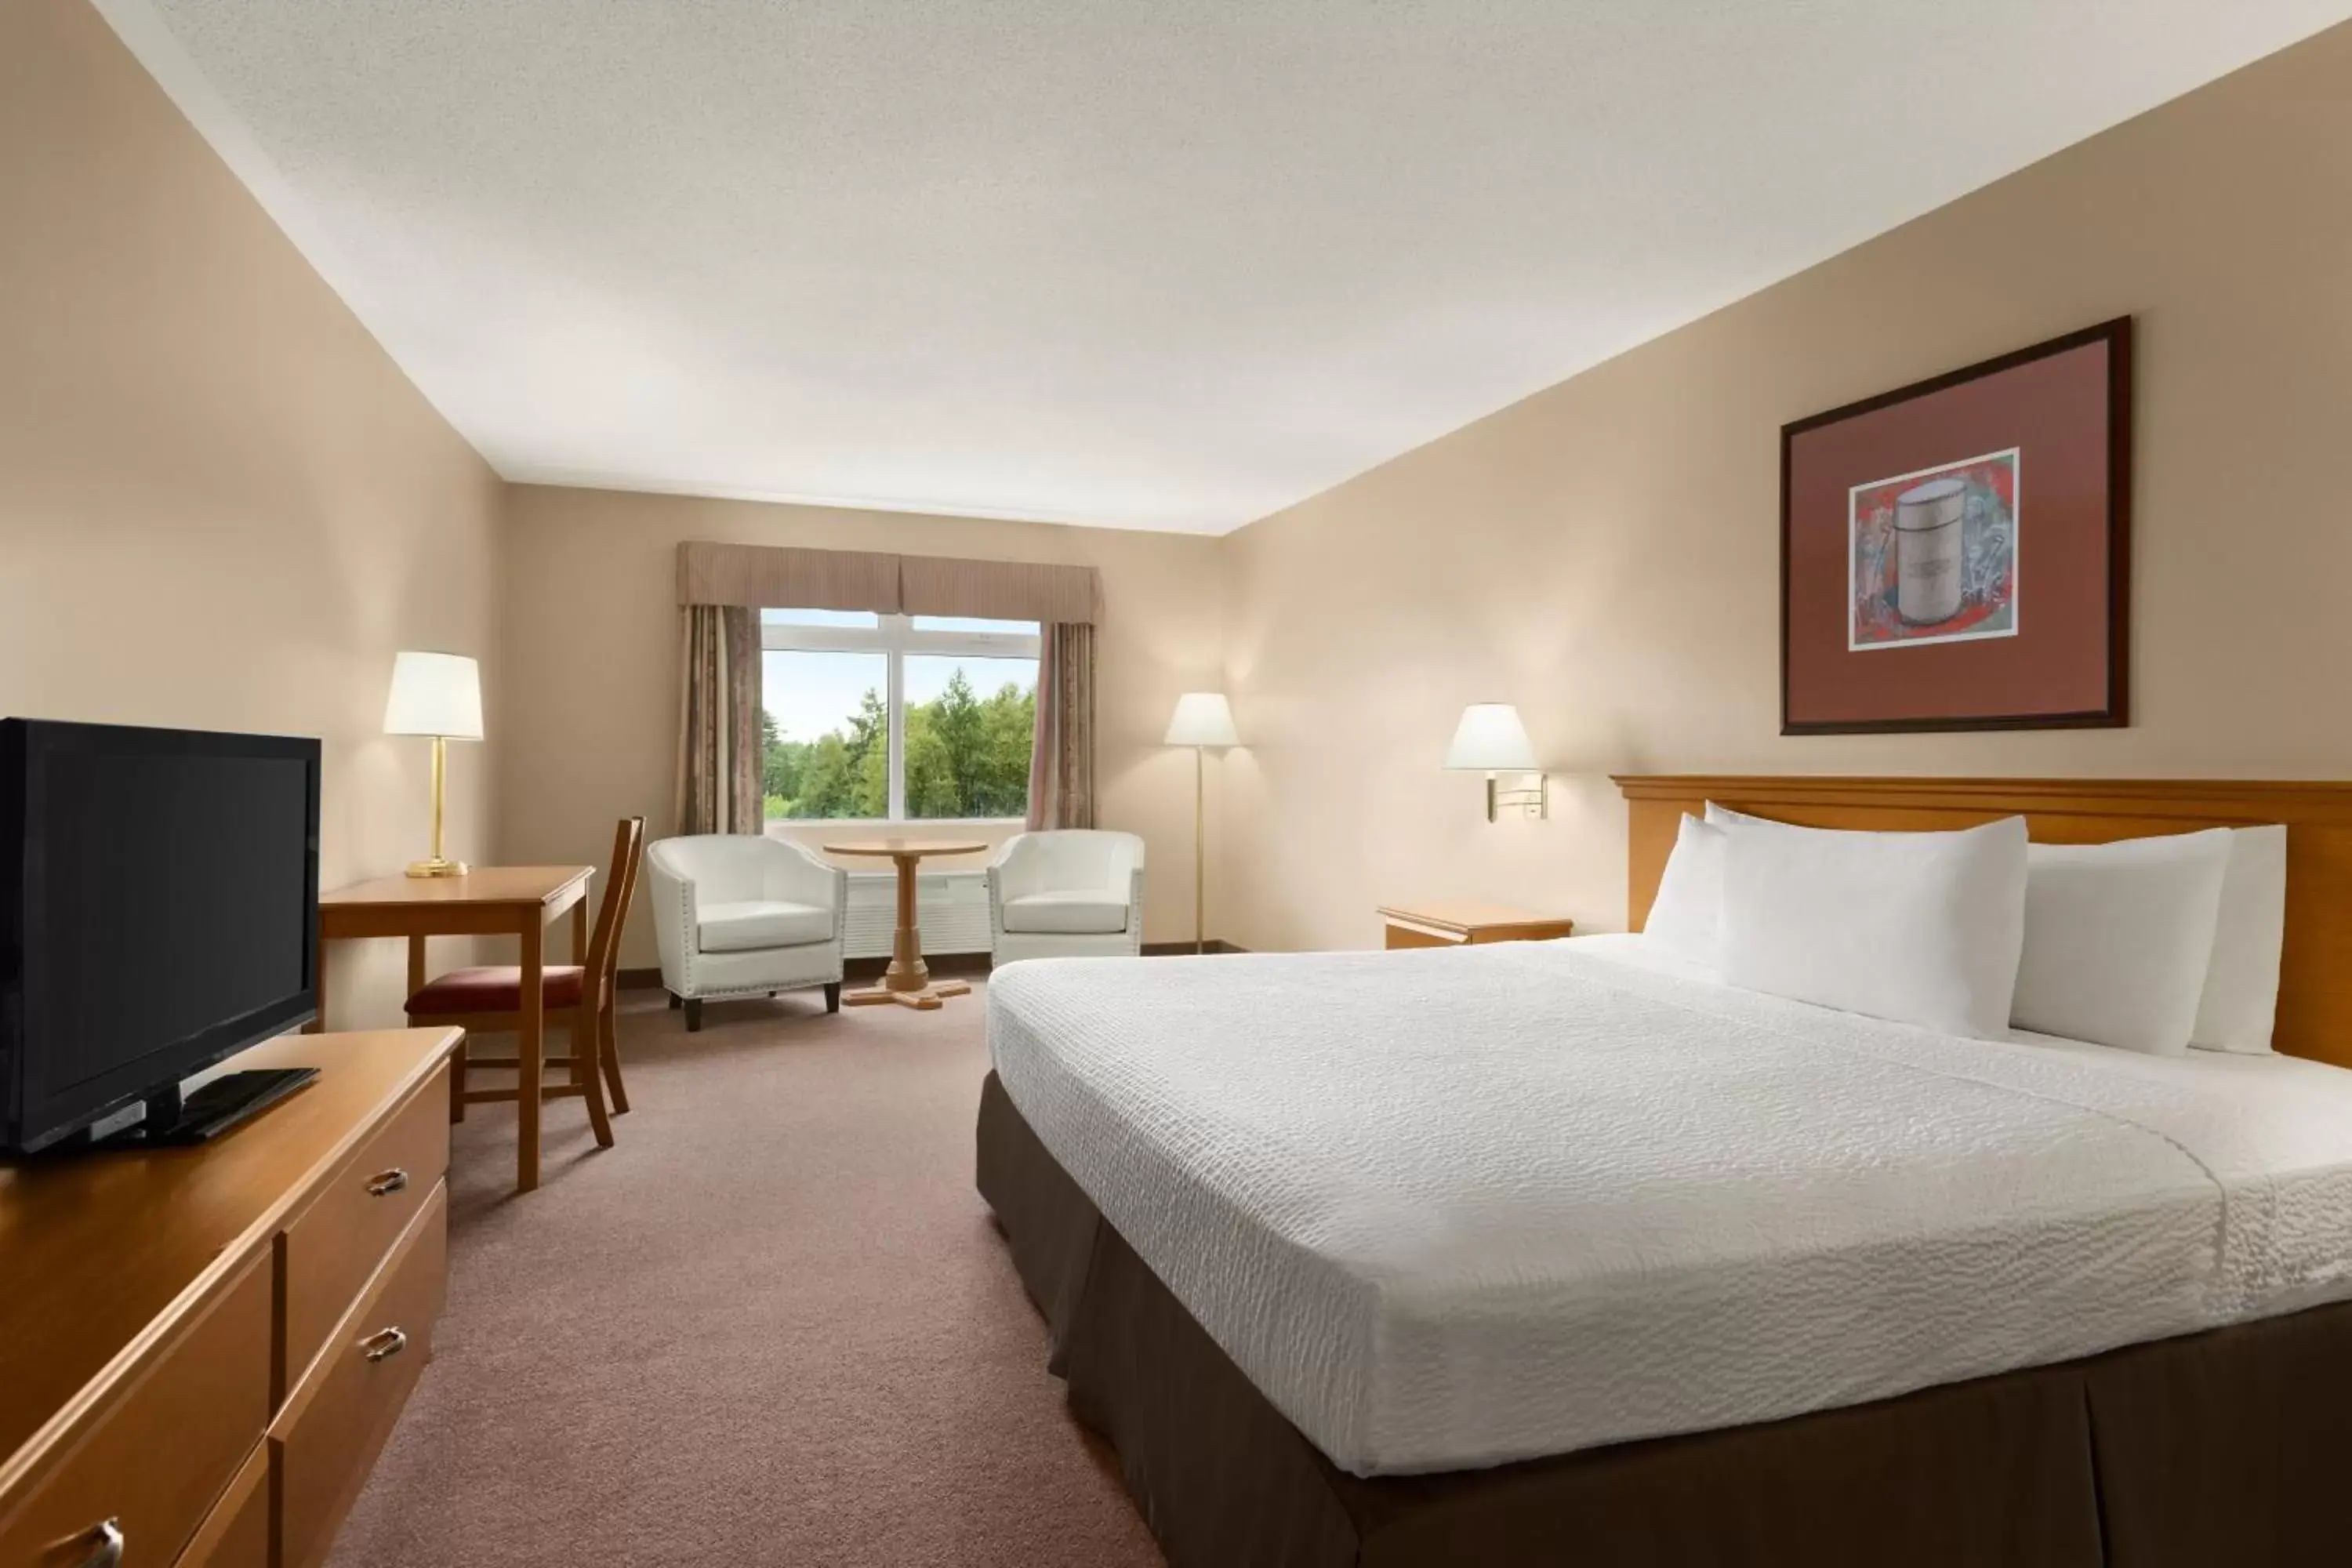 Bed, Room Photo in Days Inn by Wyndham Oromocto Conference Centre